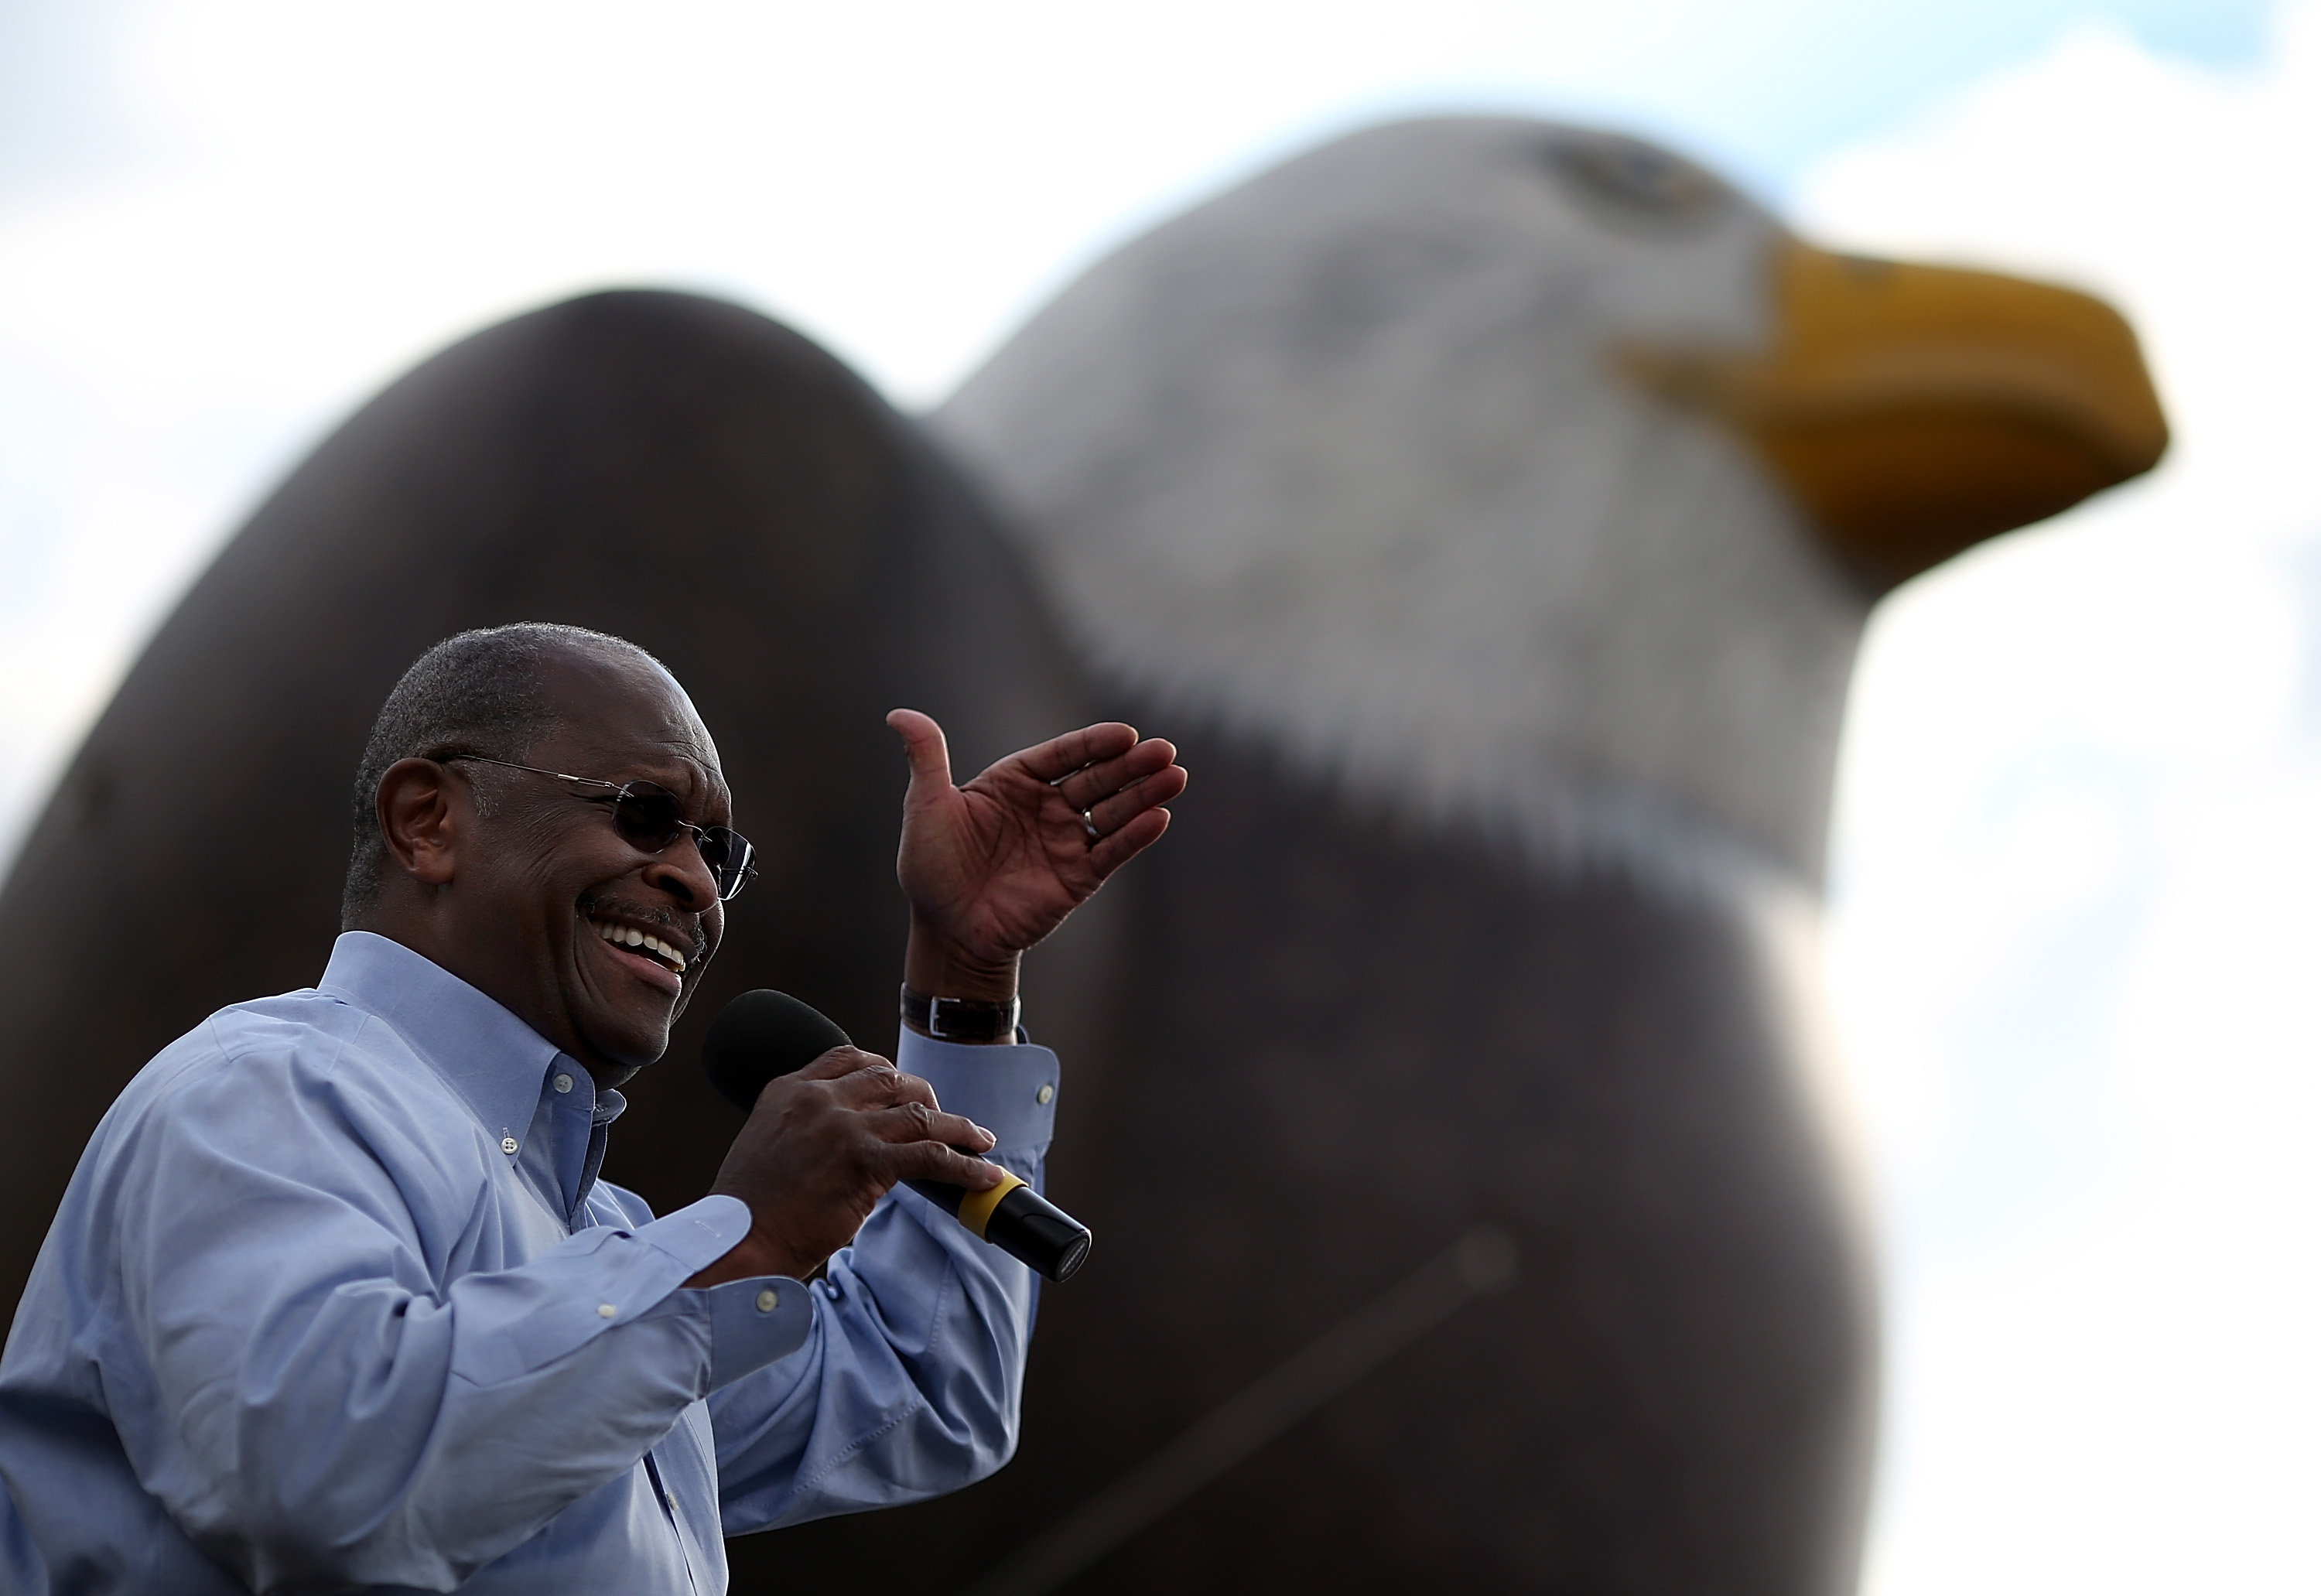 Former Republican presidential candidate Herman Cain speaks during an American For Prosperity rally on July 23, 2012 in Reno, Nevada. (Photo by Justin Sullivan/Getty Images)